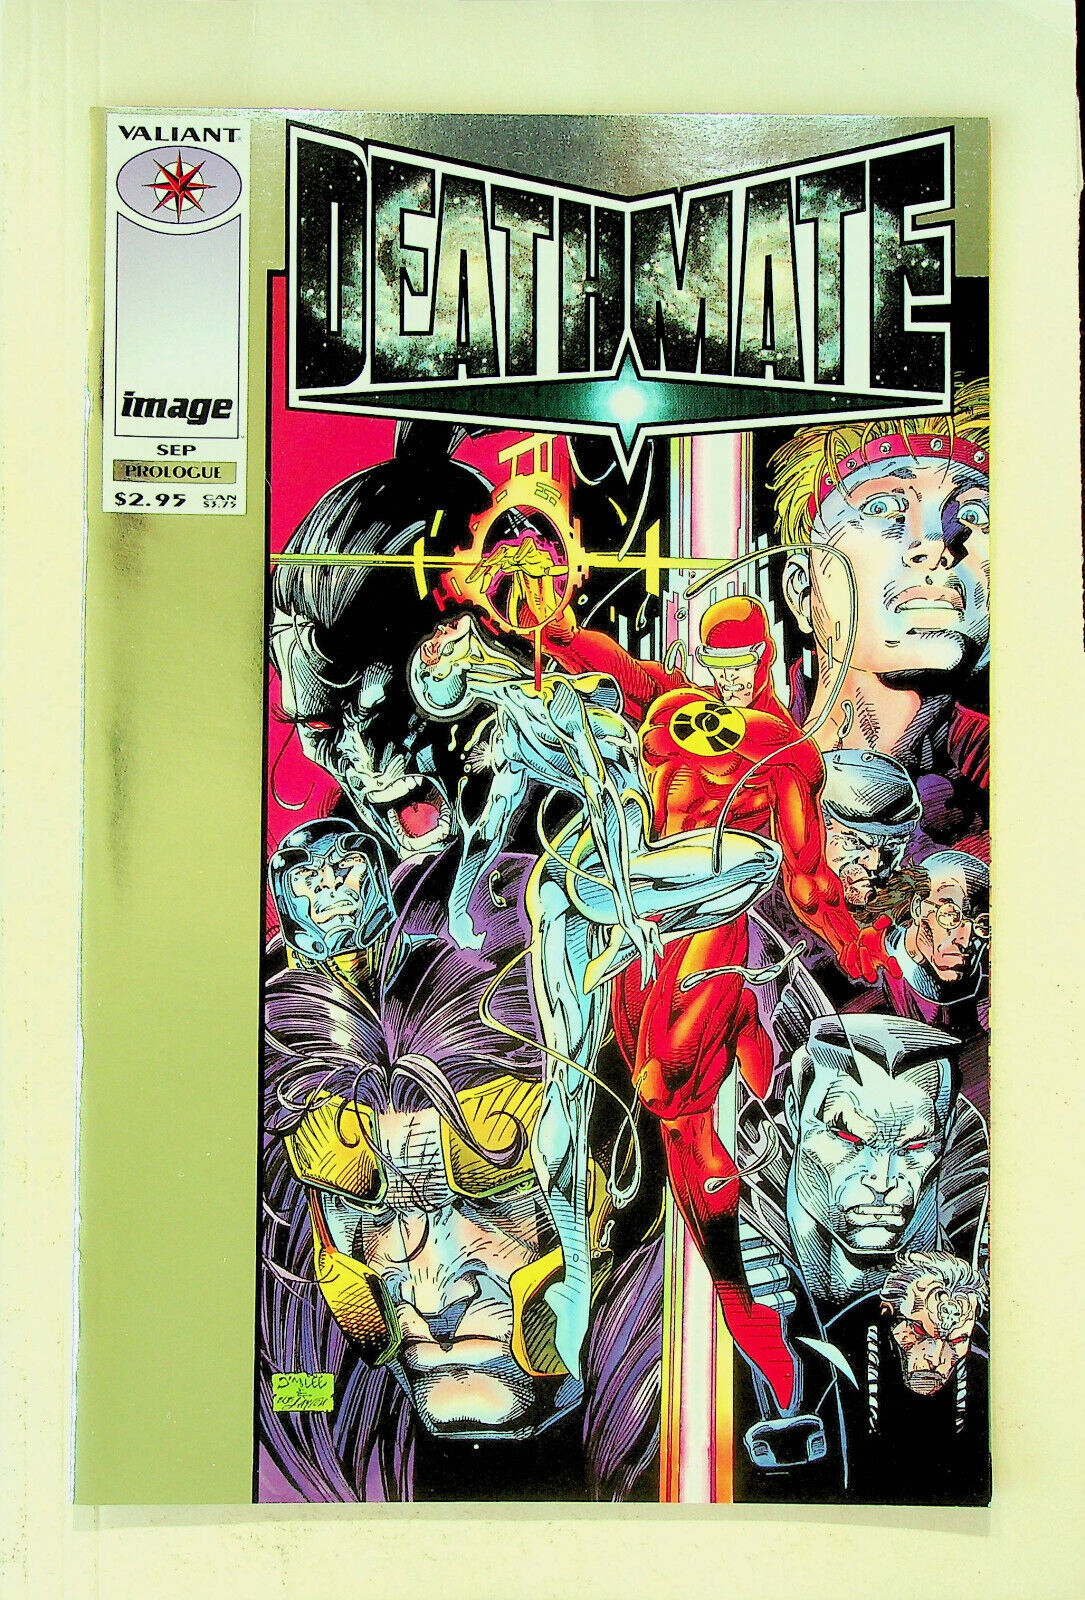 Primary image for Deathmate Prologue #nn (Sep 1993, Valiant) - Near Mint